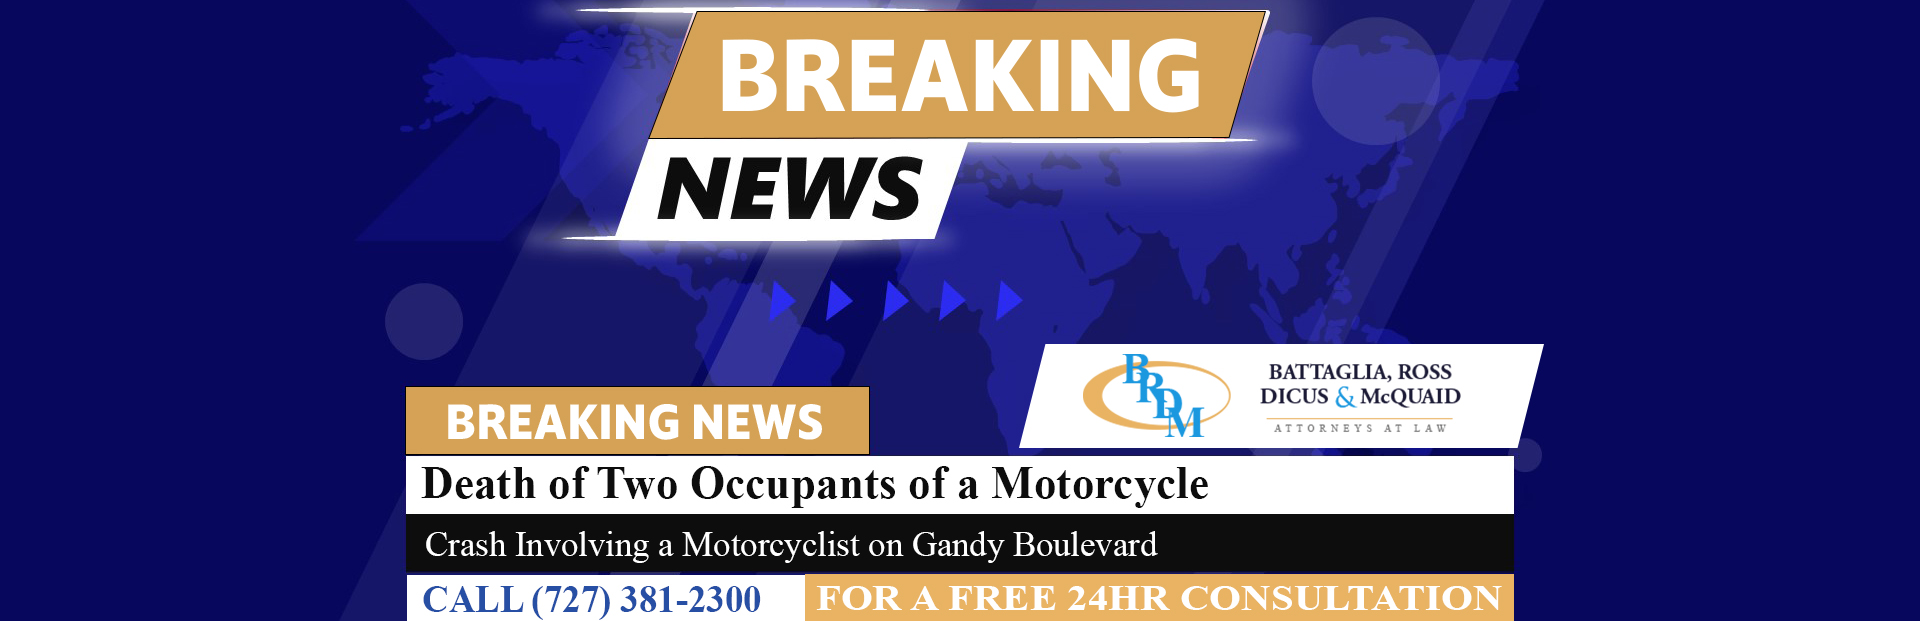 [11-20-22] Death of Two Occupants of a Motorcycle Following Crash on Gandy Boulevard